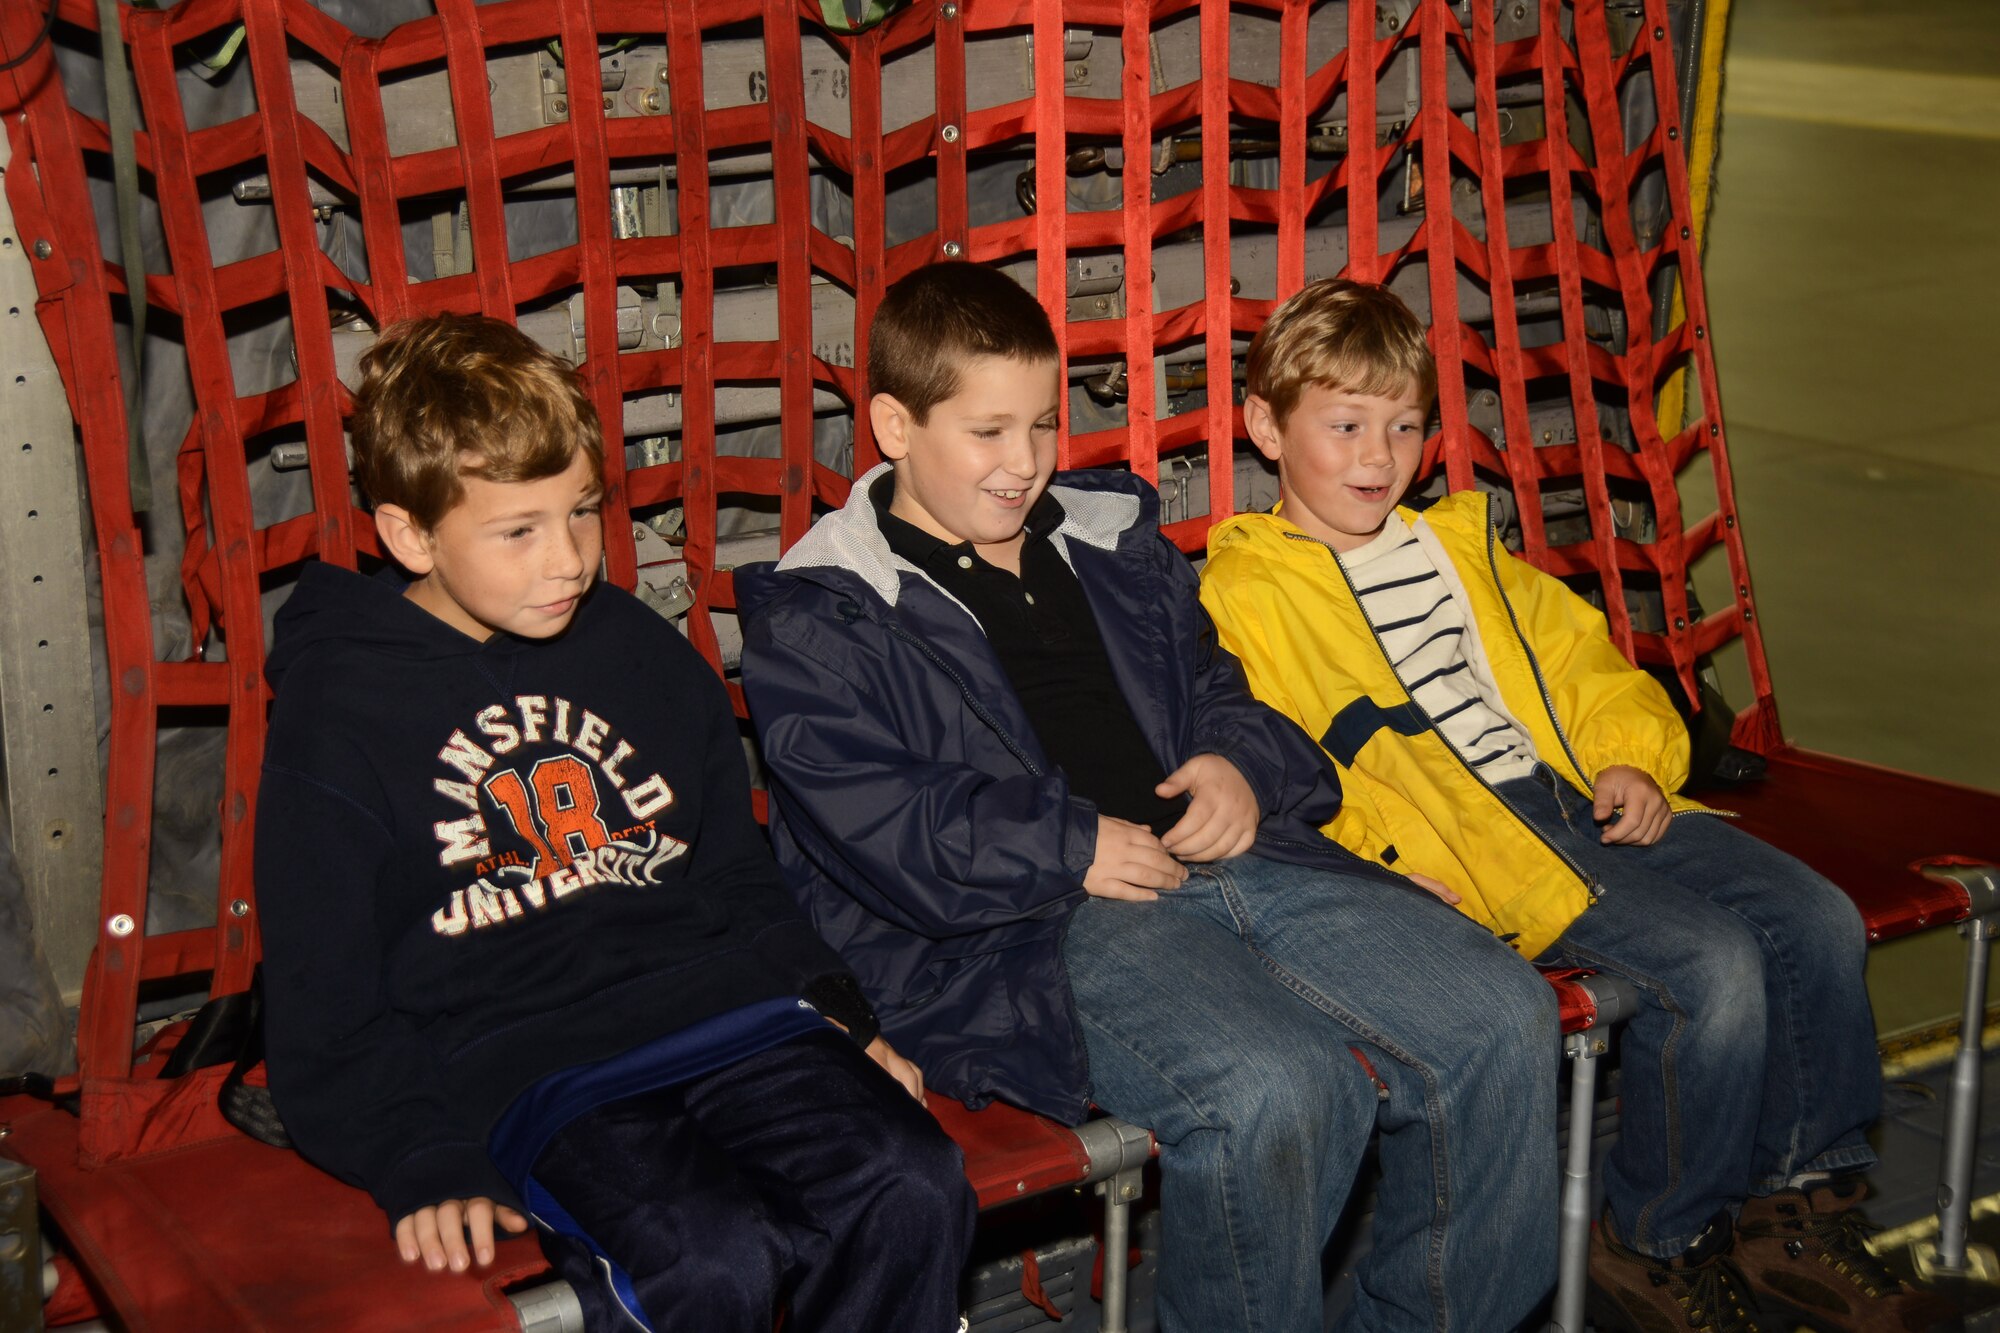 (From left to right) Colton Fillmore, 8, Nathan Defreitas, 8, and Landon Fillmore, 6, take a seat during their tour in a C-130H Herculees aircraft at Bradley Air National Guard Base, East Granby, Conn., Oct. 4, 2014. The boys are family members of employees of Fillmore Express Inc. who took part in a base tour. (Air National Guard photo by Senior Airman Jennifer Pierce)